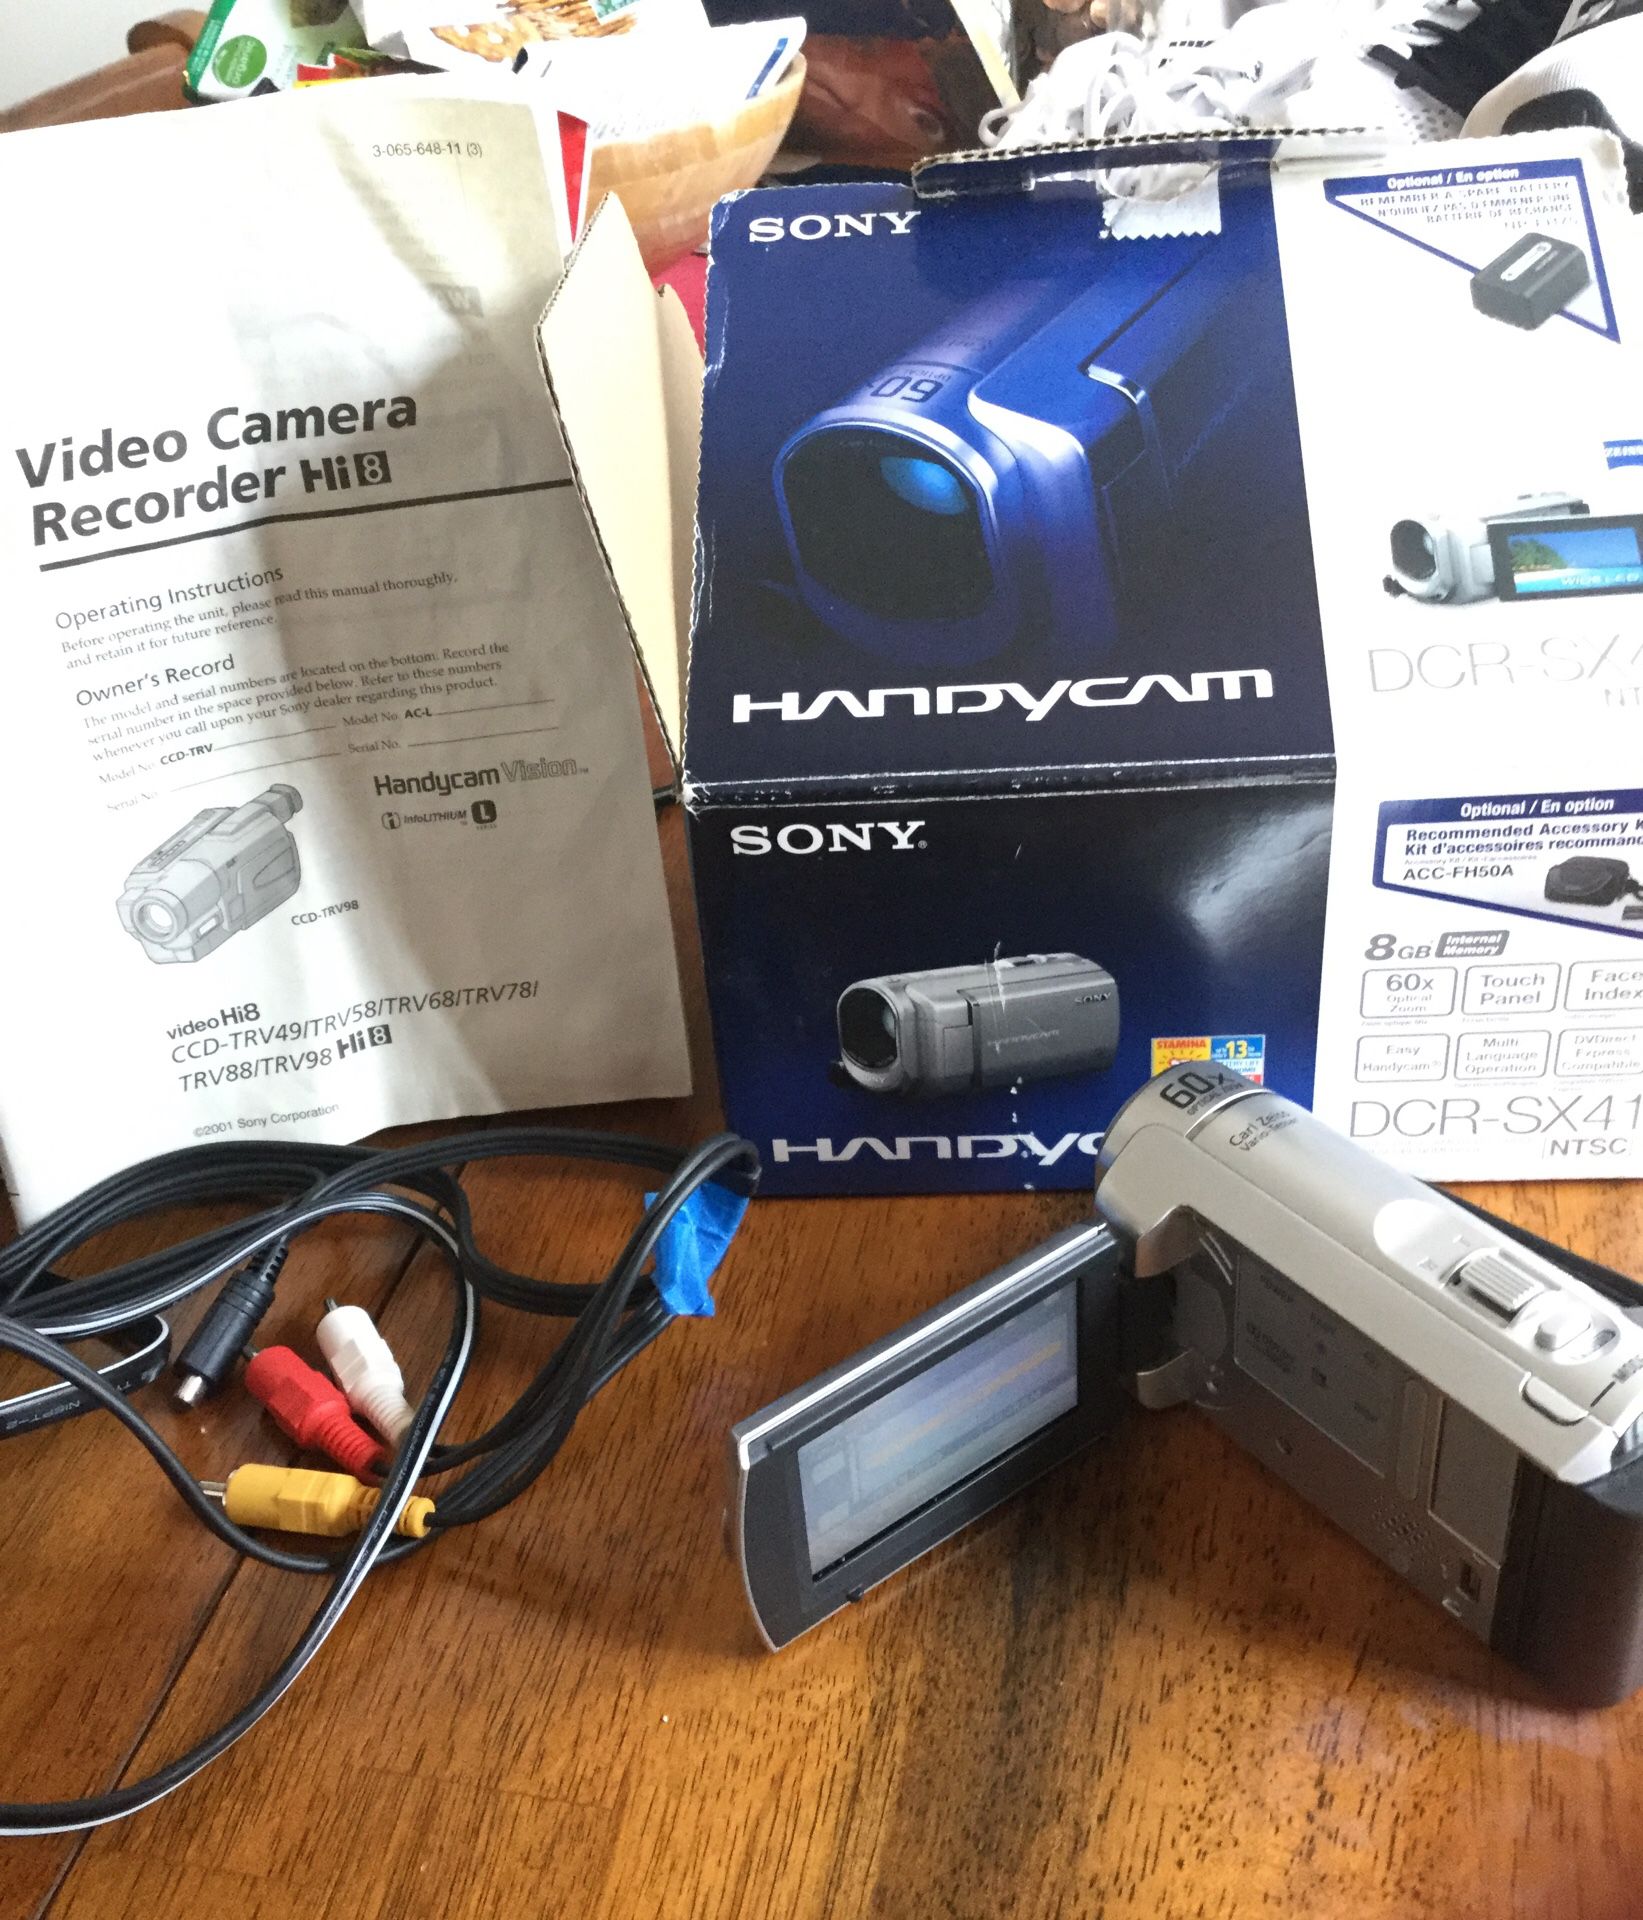 Sony video camera and recorder hi eight definition barely used